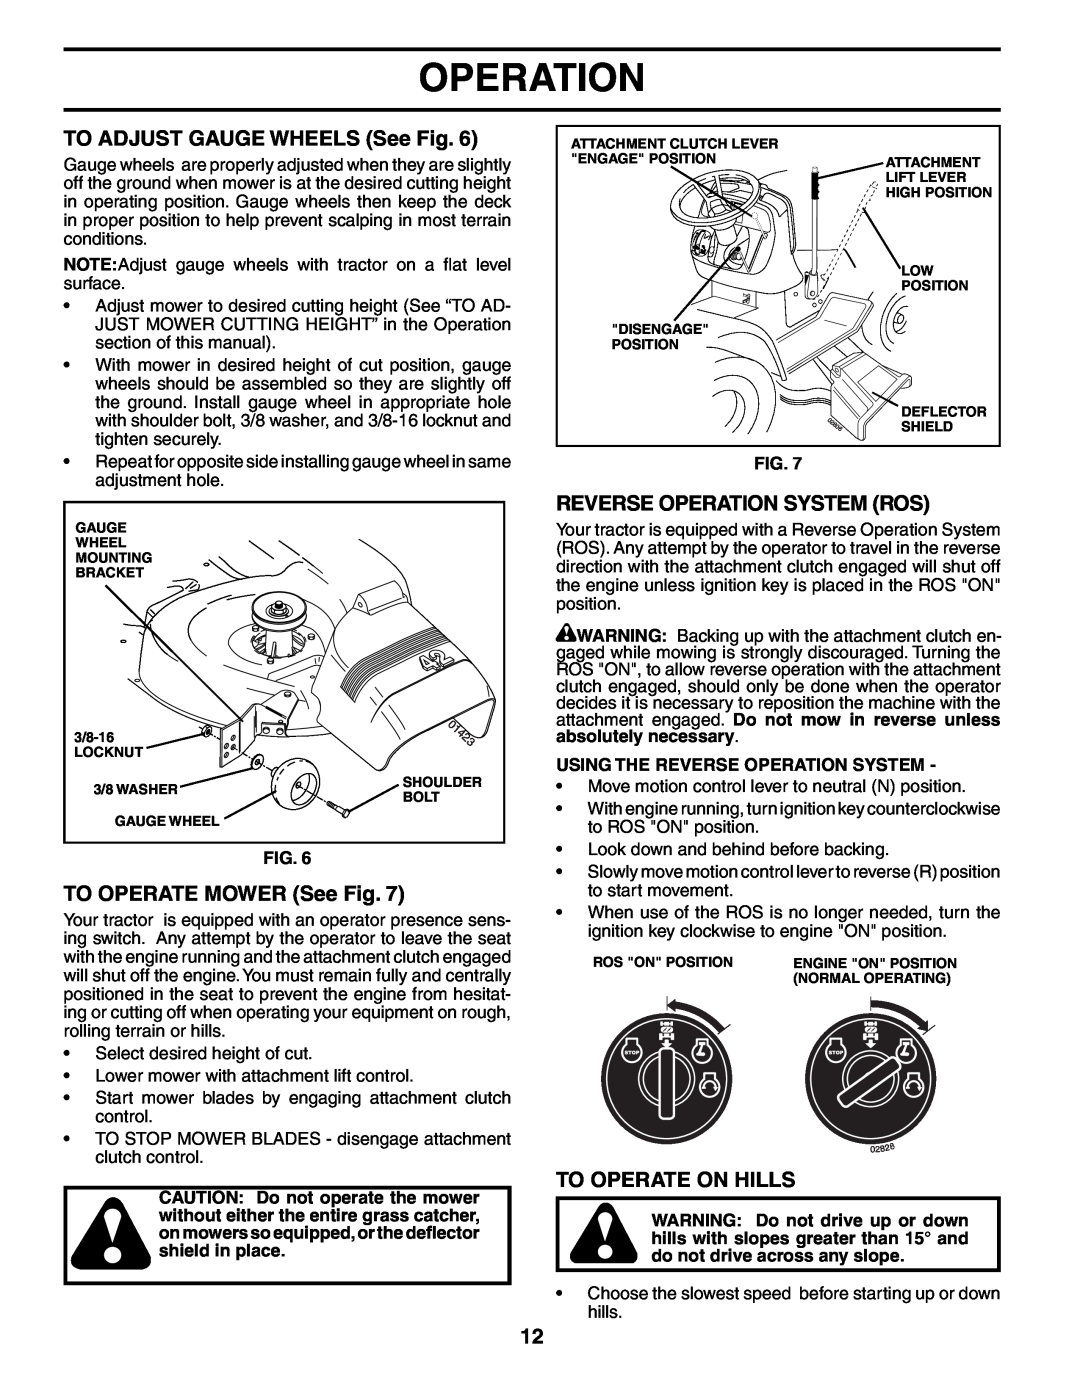 Poulan XT24H42YT manual TO ADJUST GAUGE WHEELS See Fig, TO OPERATE MOWER See Fig, Reverse Operation System Ros 